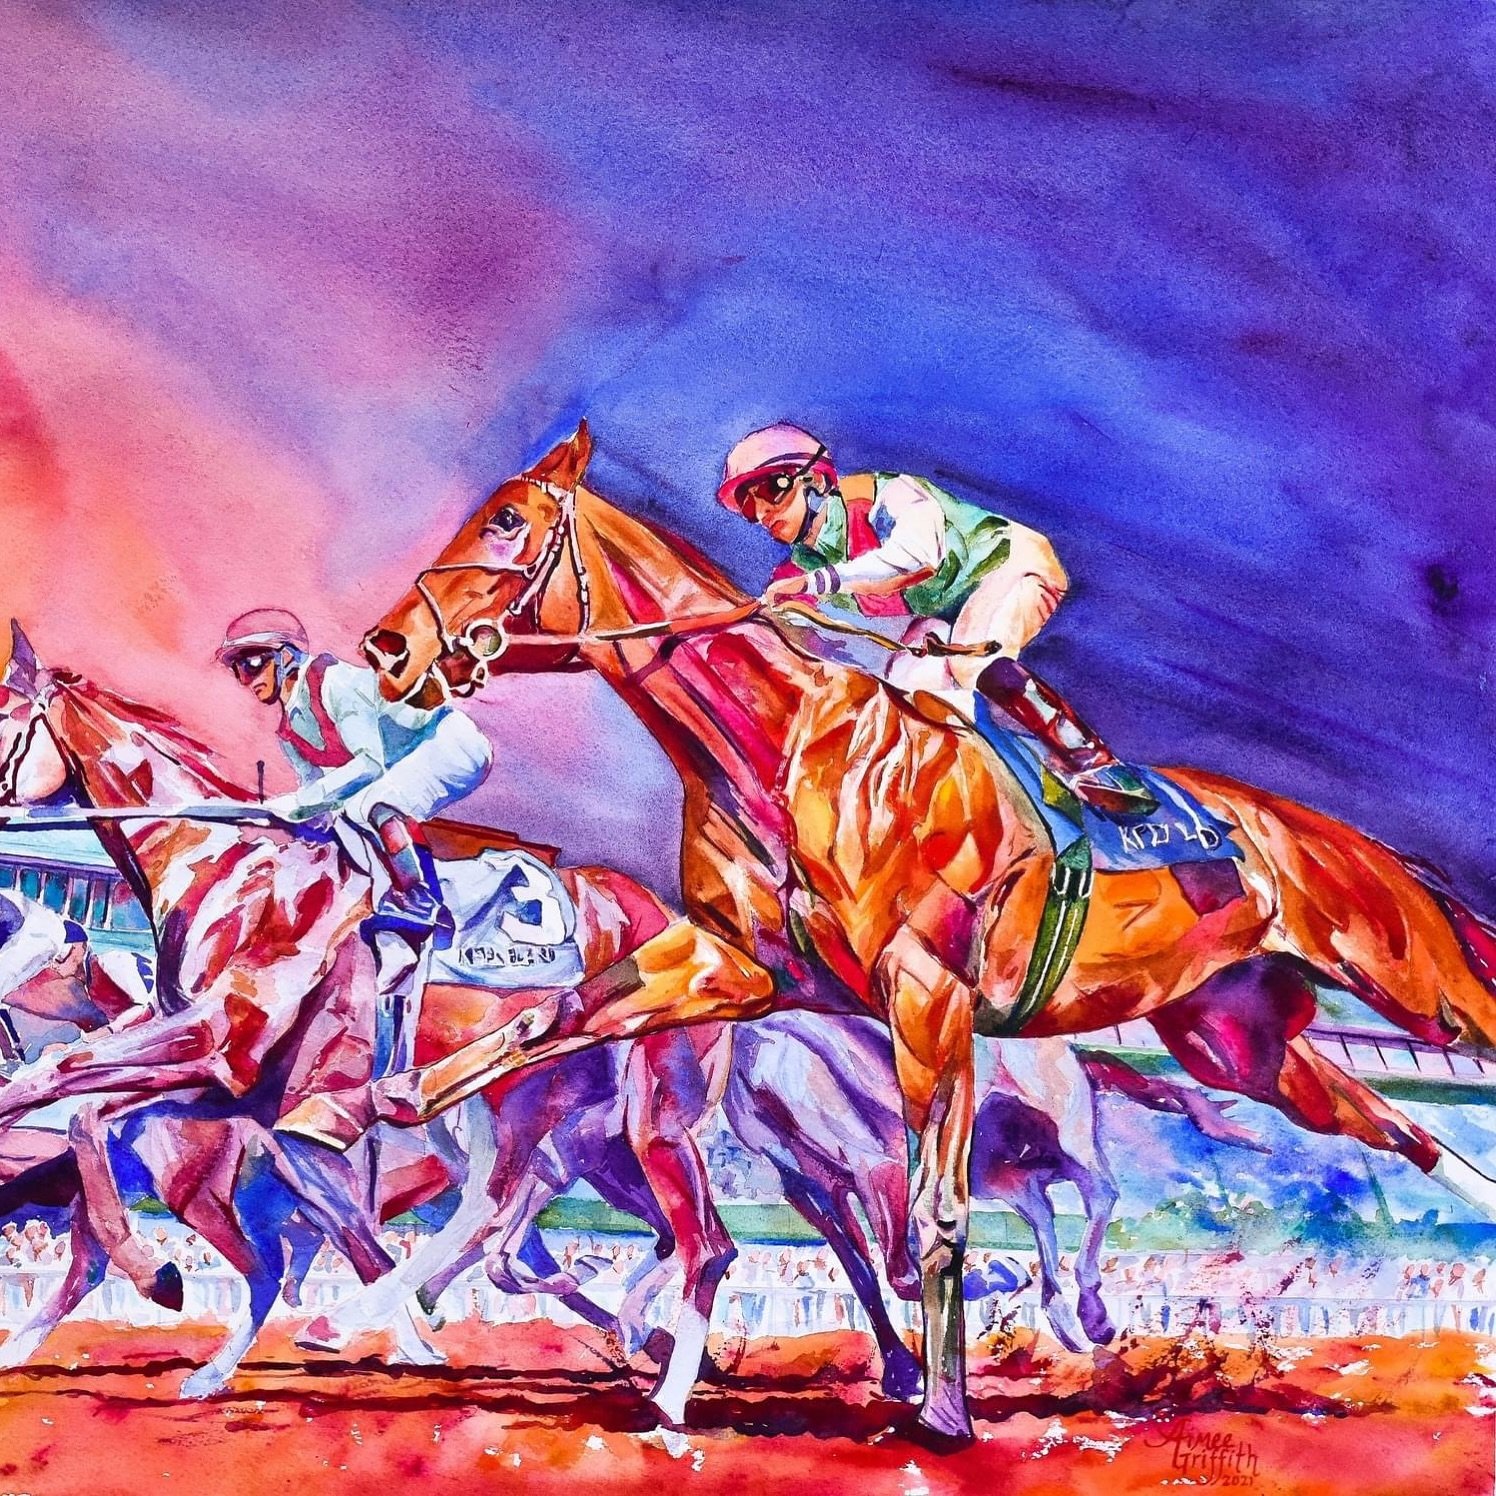 So close to the Kentucky Derby, yet we can&rsquo;t forget it&rsquo;s Keeneland season here in Lexington! This is one of my favorites of Keeneland that I haven&rsquo;t shared in a while. 

After I stopped painting during Covid, I had to get warmed up 